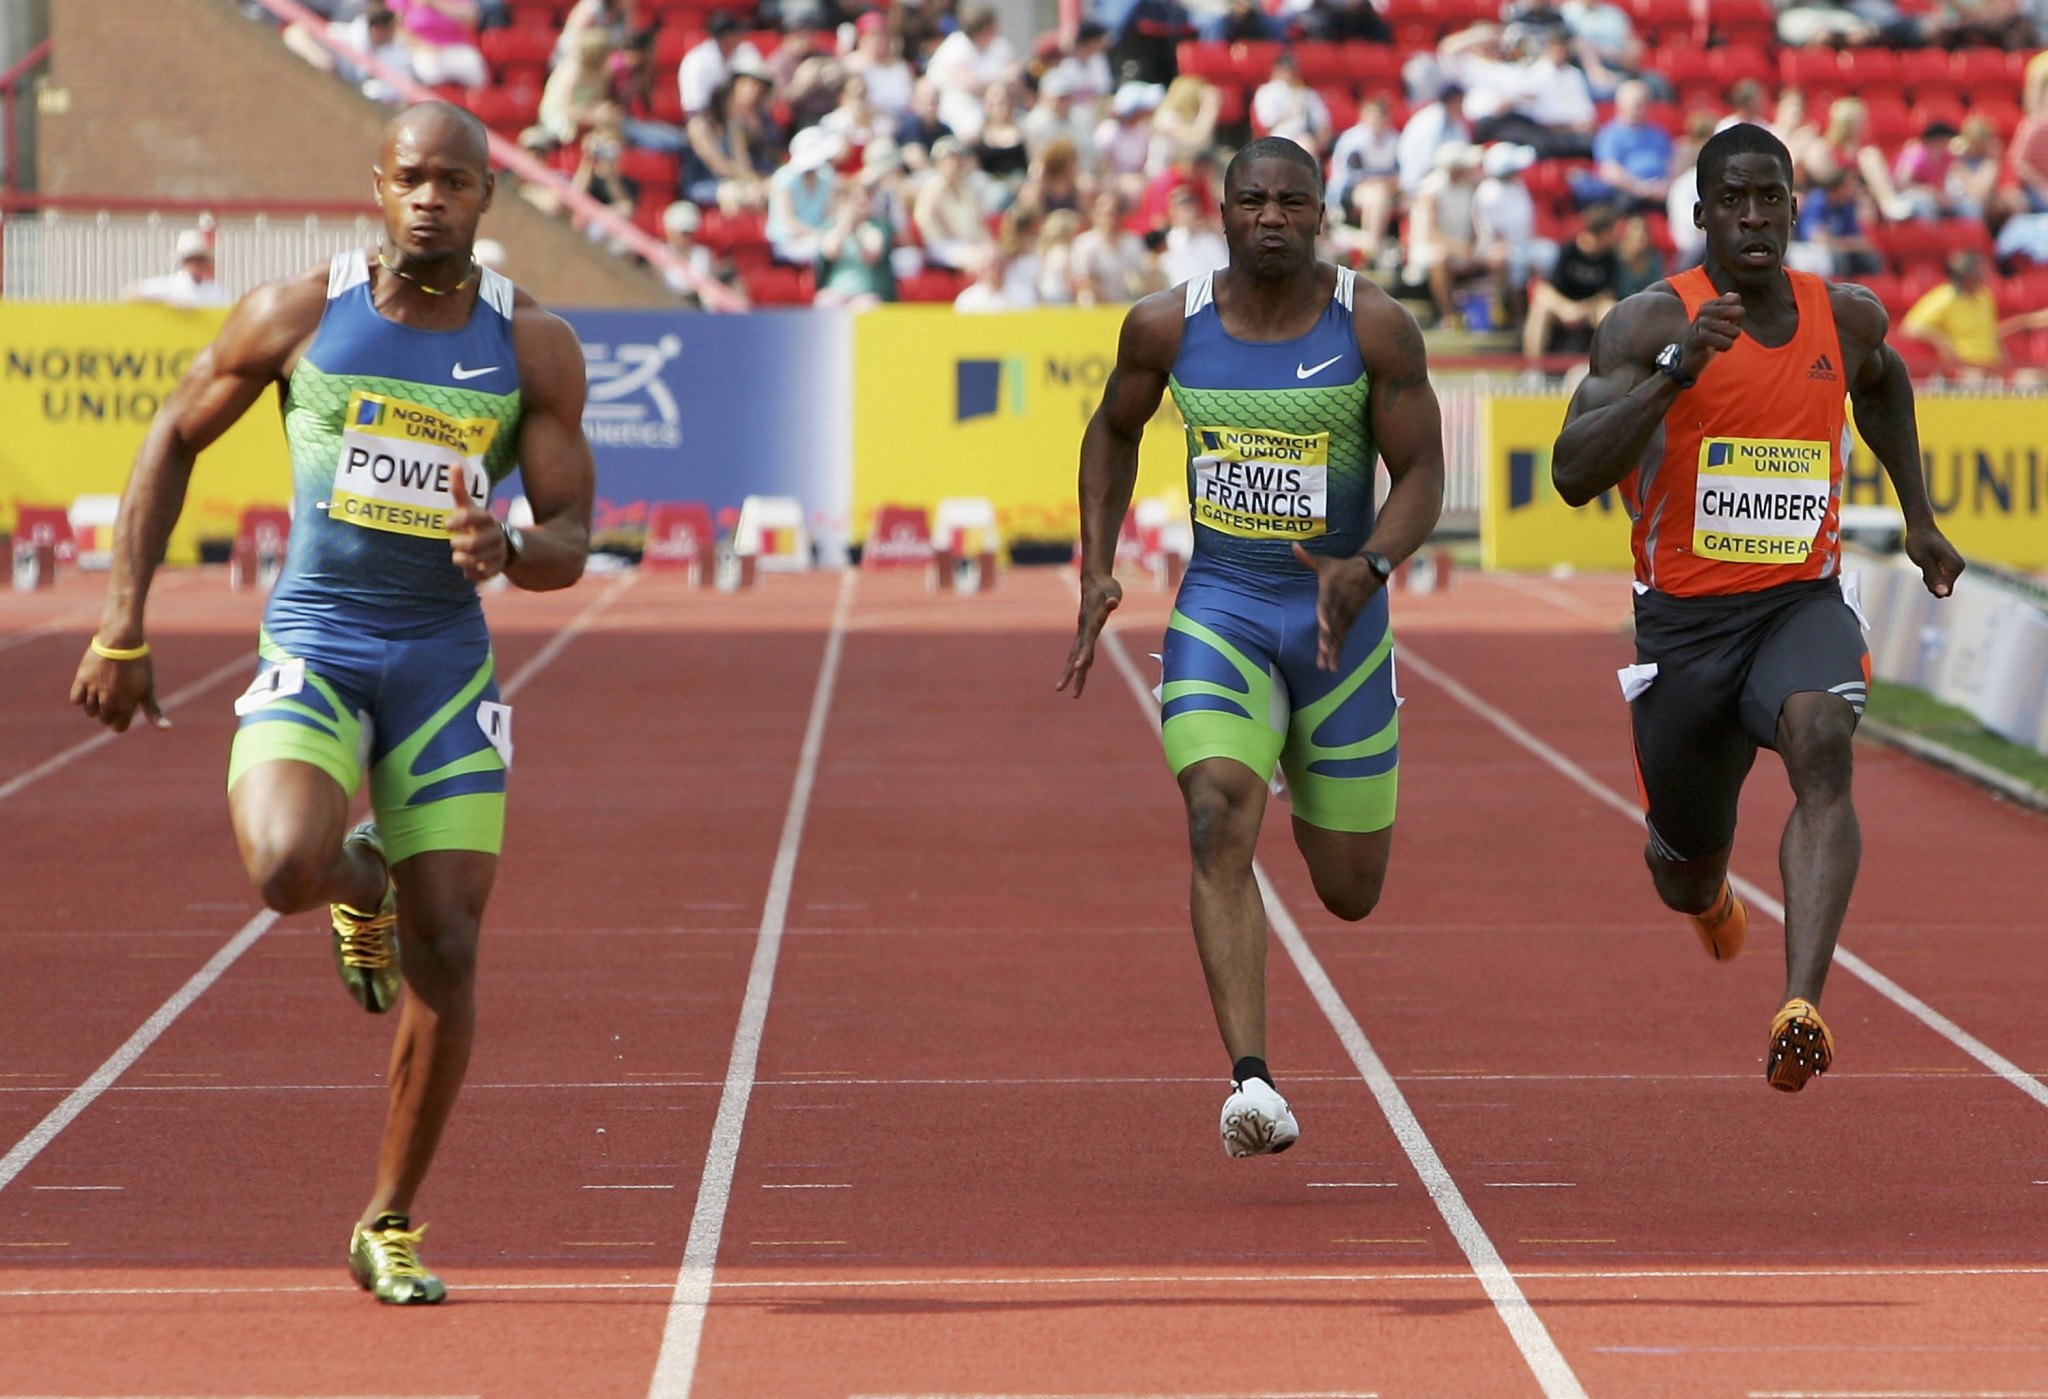 Jamaica's Asafa Powell equalled the world record for the 100 metres at the 2006 IAAF Diamond meeting in Gateshead and the venue in the North-East of England is set to return to the circuit in 2020 ©Getty Images